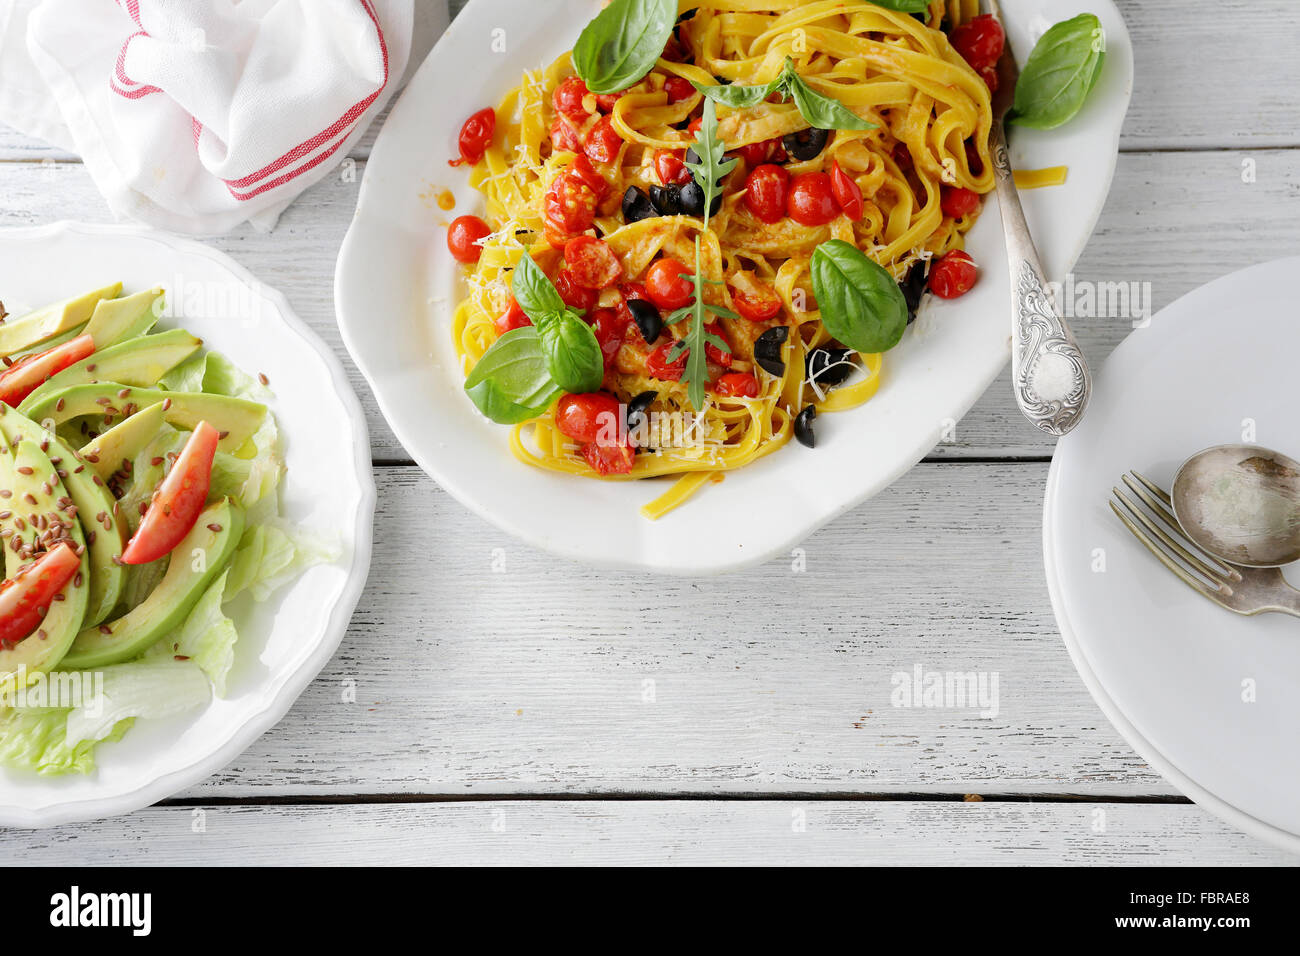 pasta and salad on wooden table, top view Stock Photo